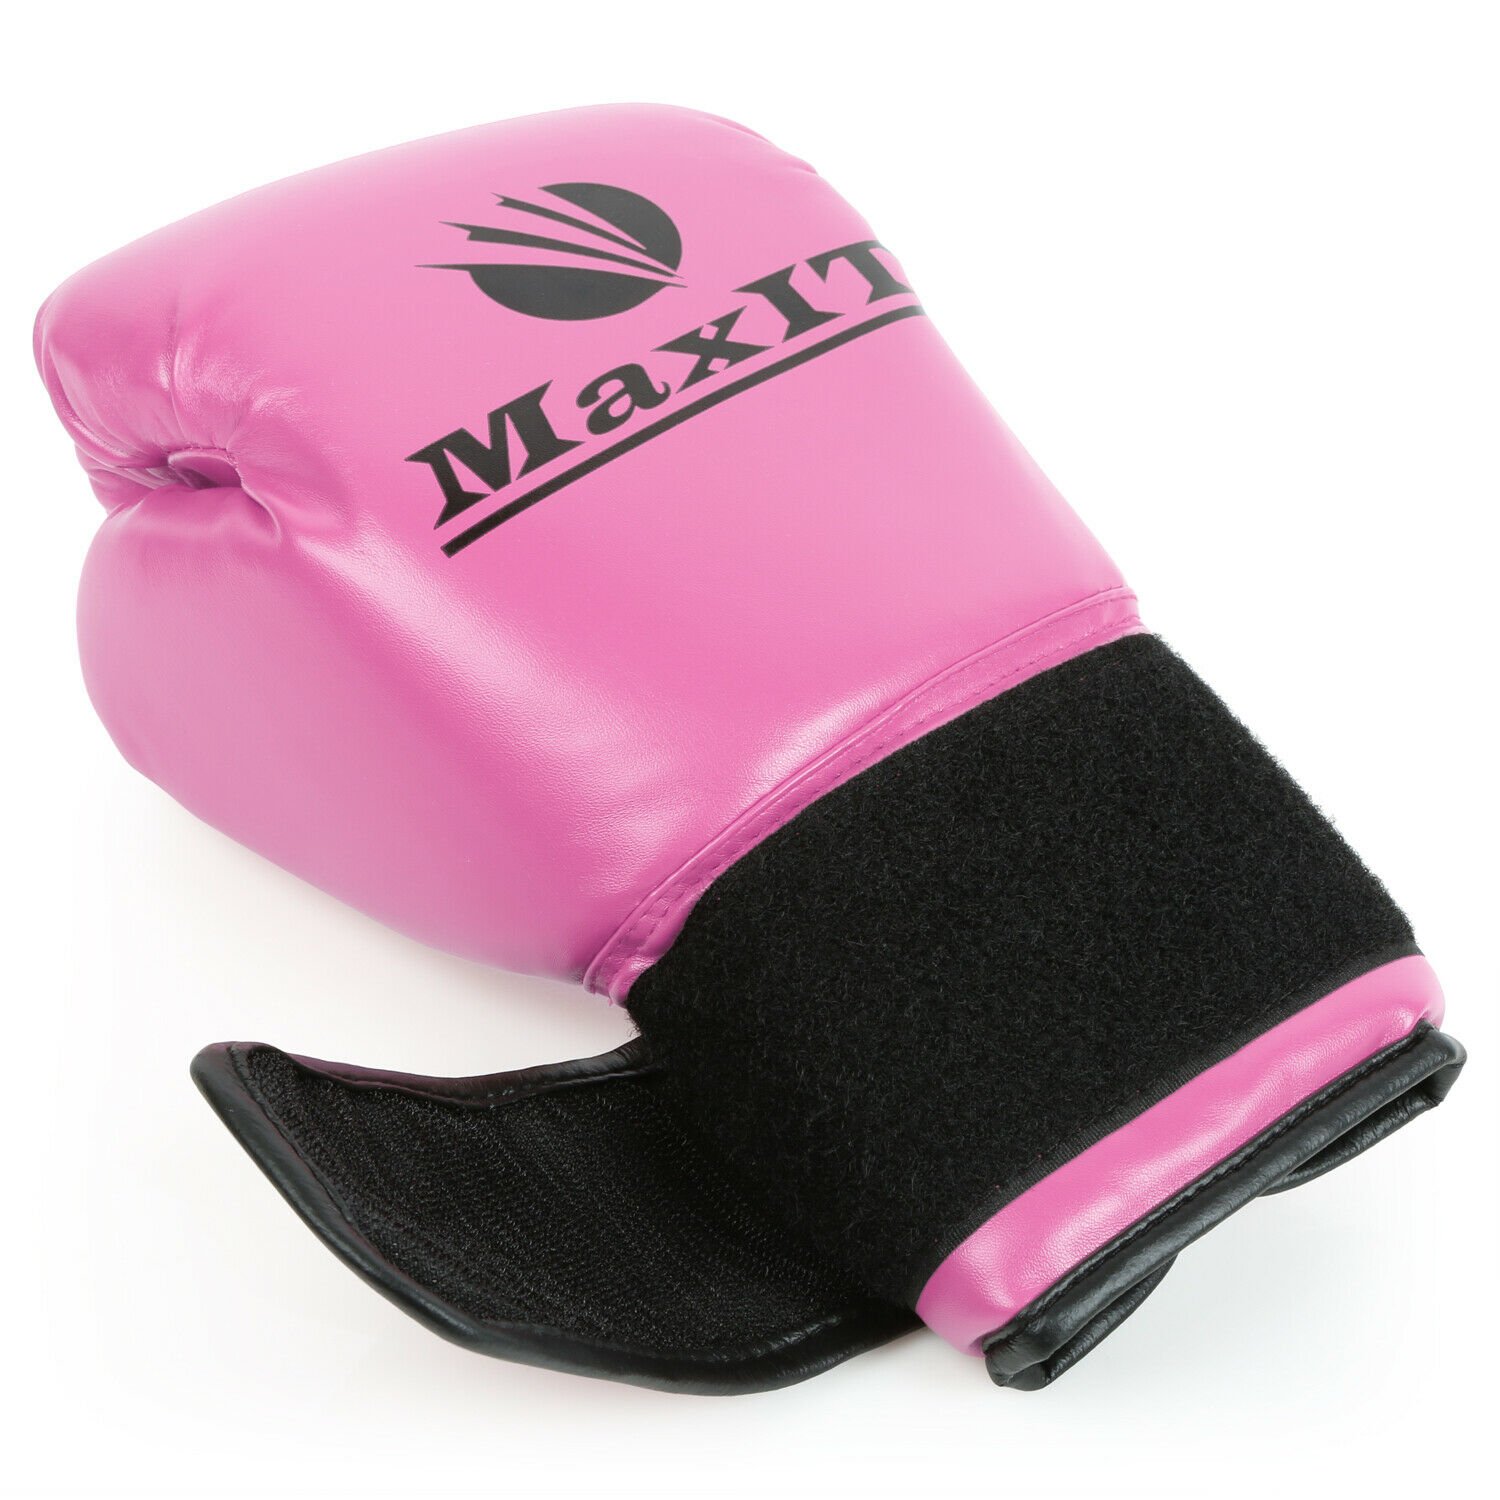 Boxing Fighting Sports Padded Junior Hand Glove Set for Sparring MaxIT Pro Style Youth Boxing Gloves Punching Bag Kickboxing Junior Training for Kids Boys or Girls